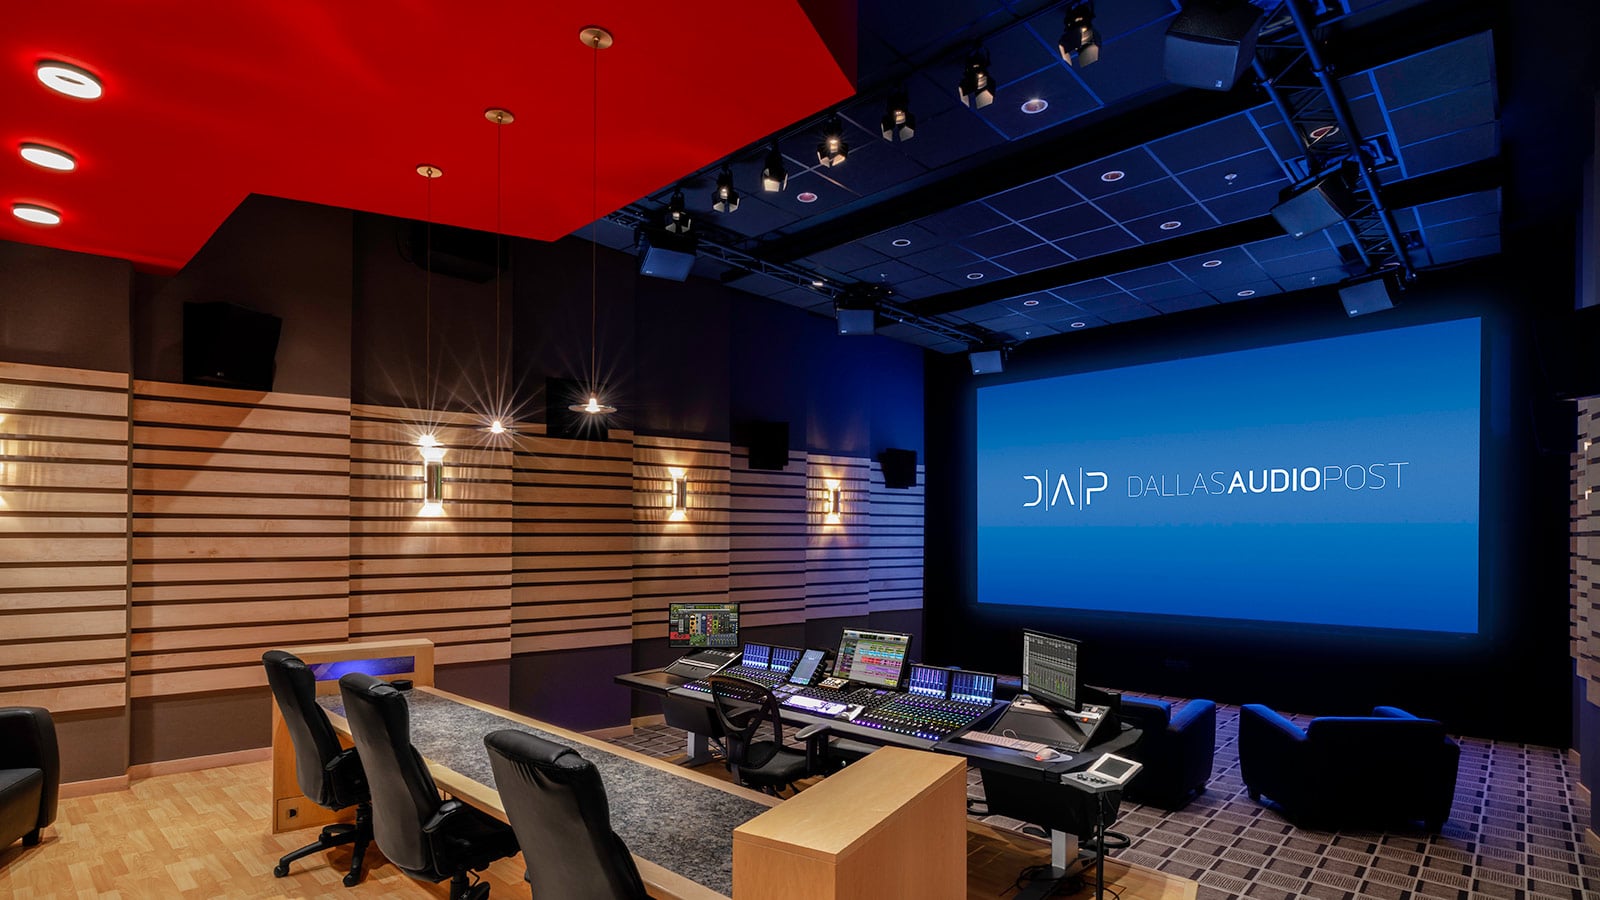 Meyer Sound System Provides Full Immersion in “Double Duty” Atmos Room at Dallas Audio Post